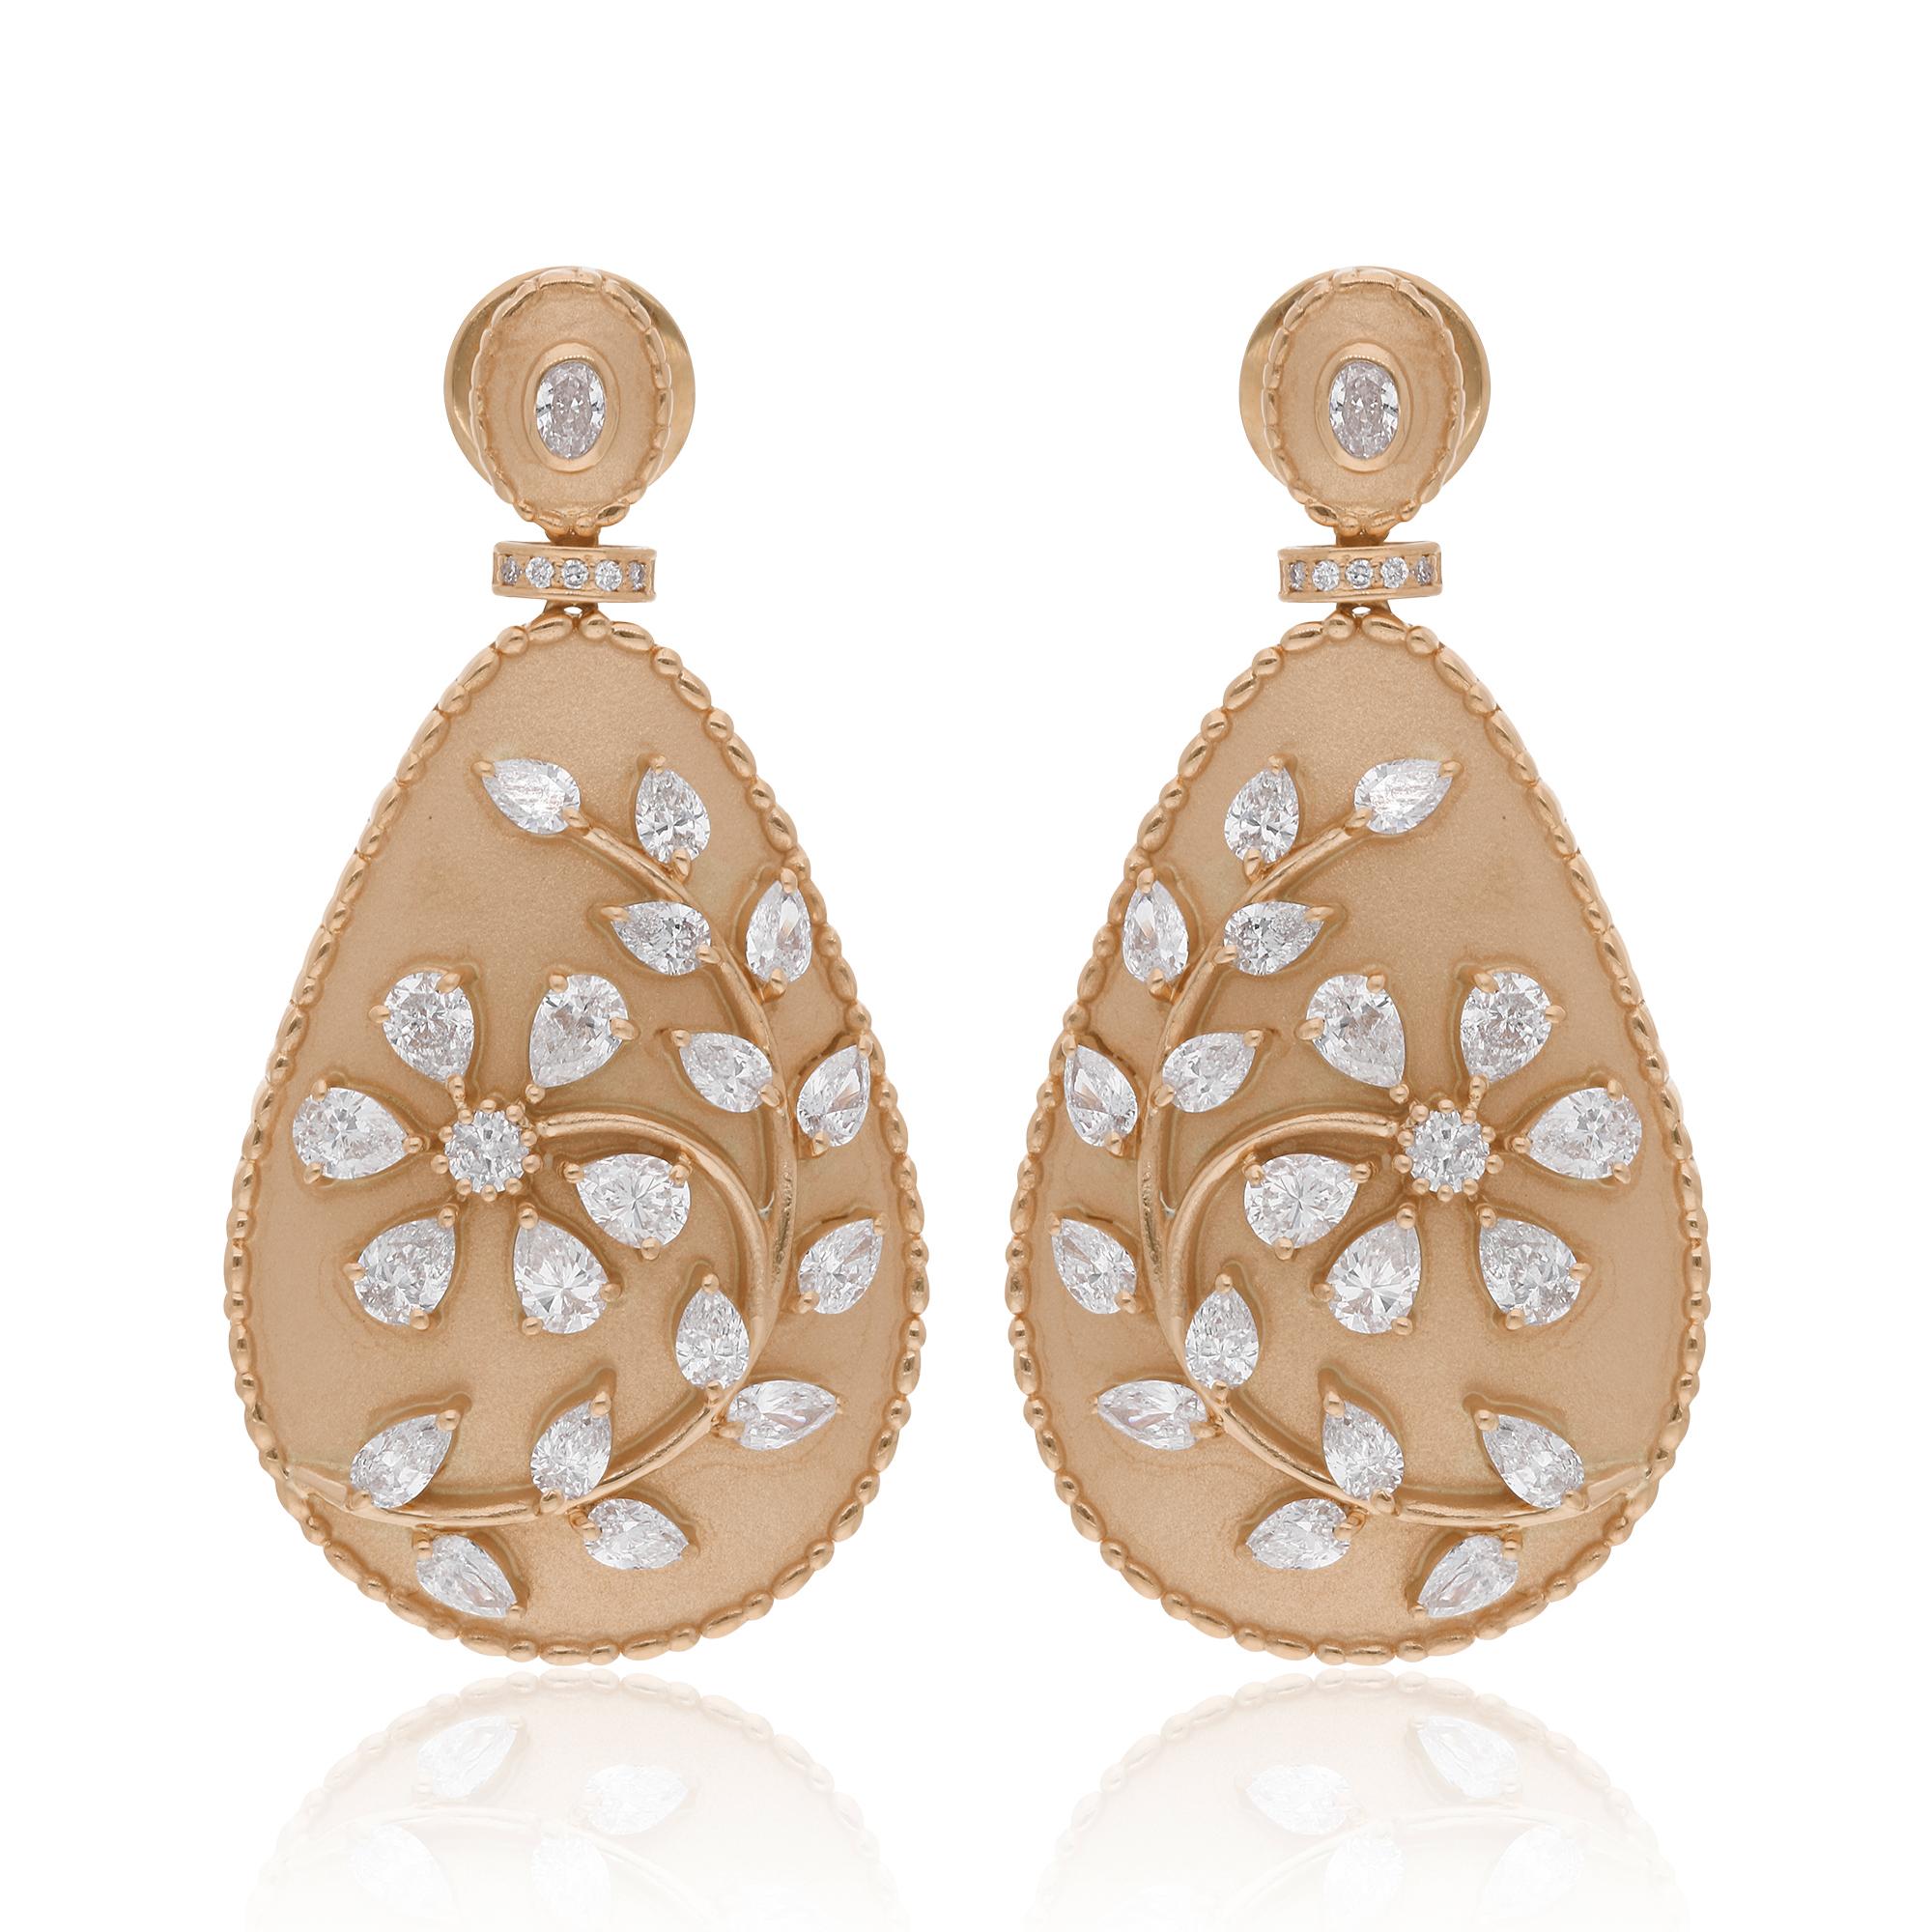 Adorn yourself with the enchanting elegance of these 2.81 Carat Pear & Round Diamond Dangle Earrings, meticulously crafted in radiant 18 Karat Yellow Gold. These exquisite earrings are a radiant celebration of sophistication and grace, designed to